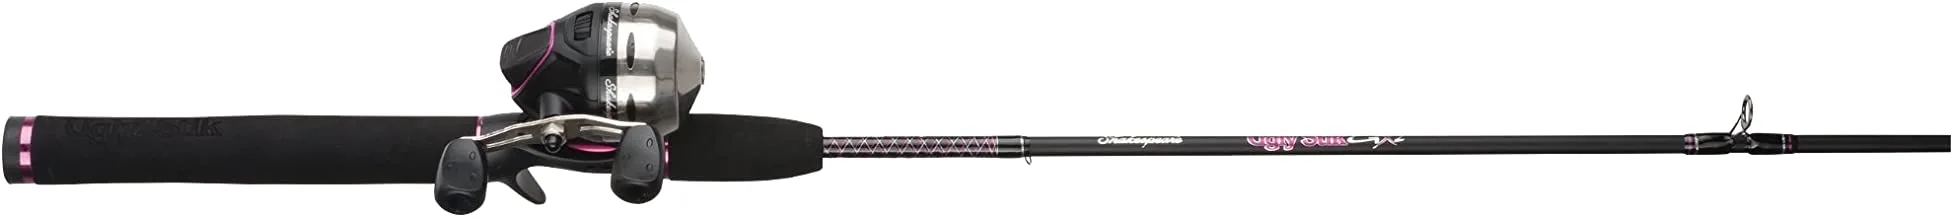 Ugly Stik 5’6” GX2 Spincast Ladies Fishing Rod and Reel Spinning Combo, Ugly Tech Construction with Clear Tip Design, 5’6” 2-Piece Rod, Black